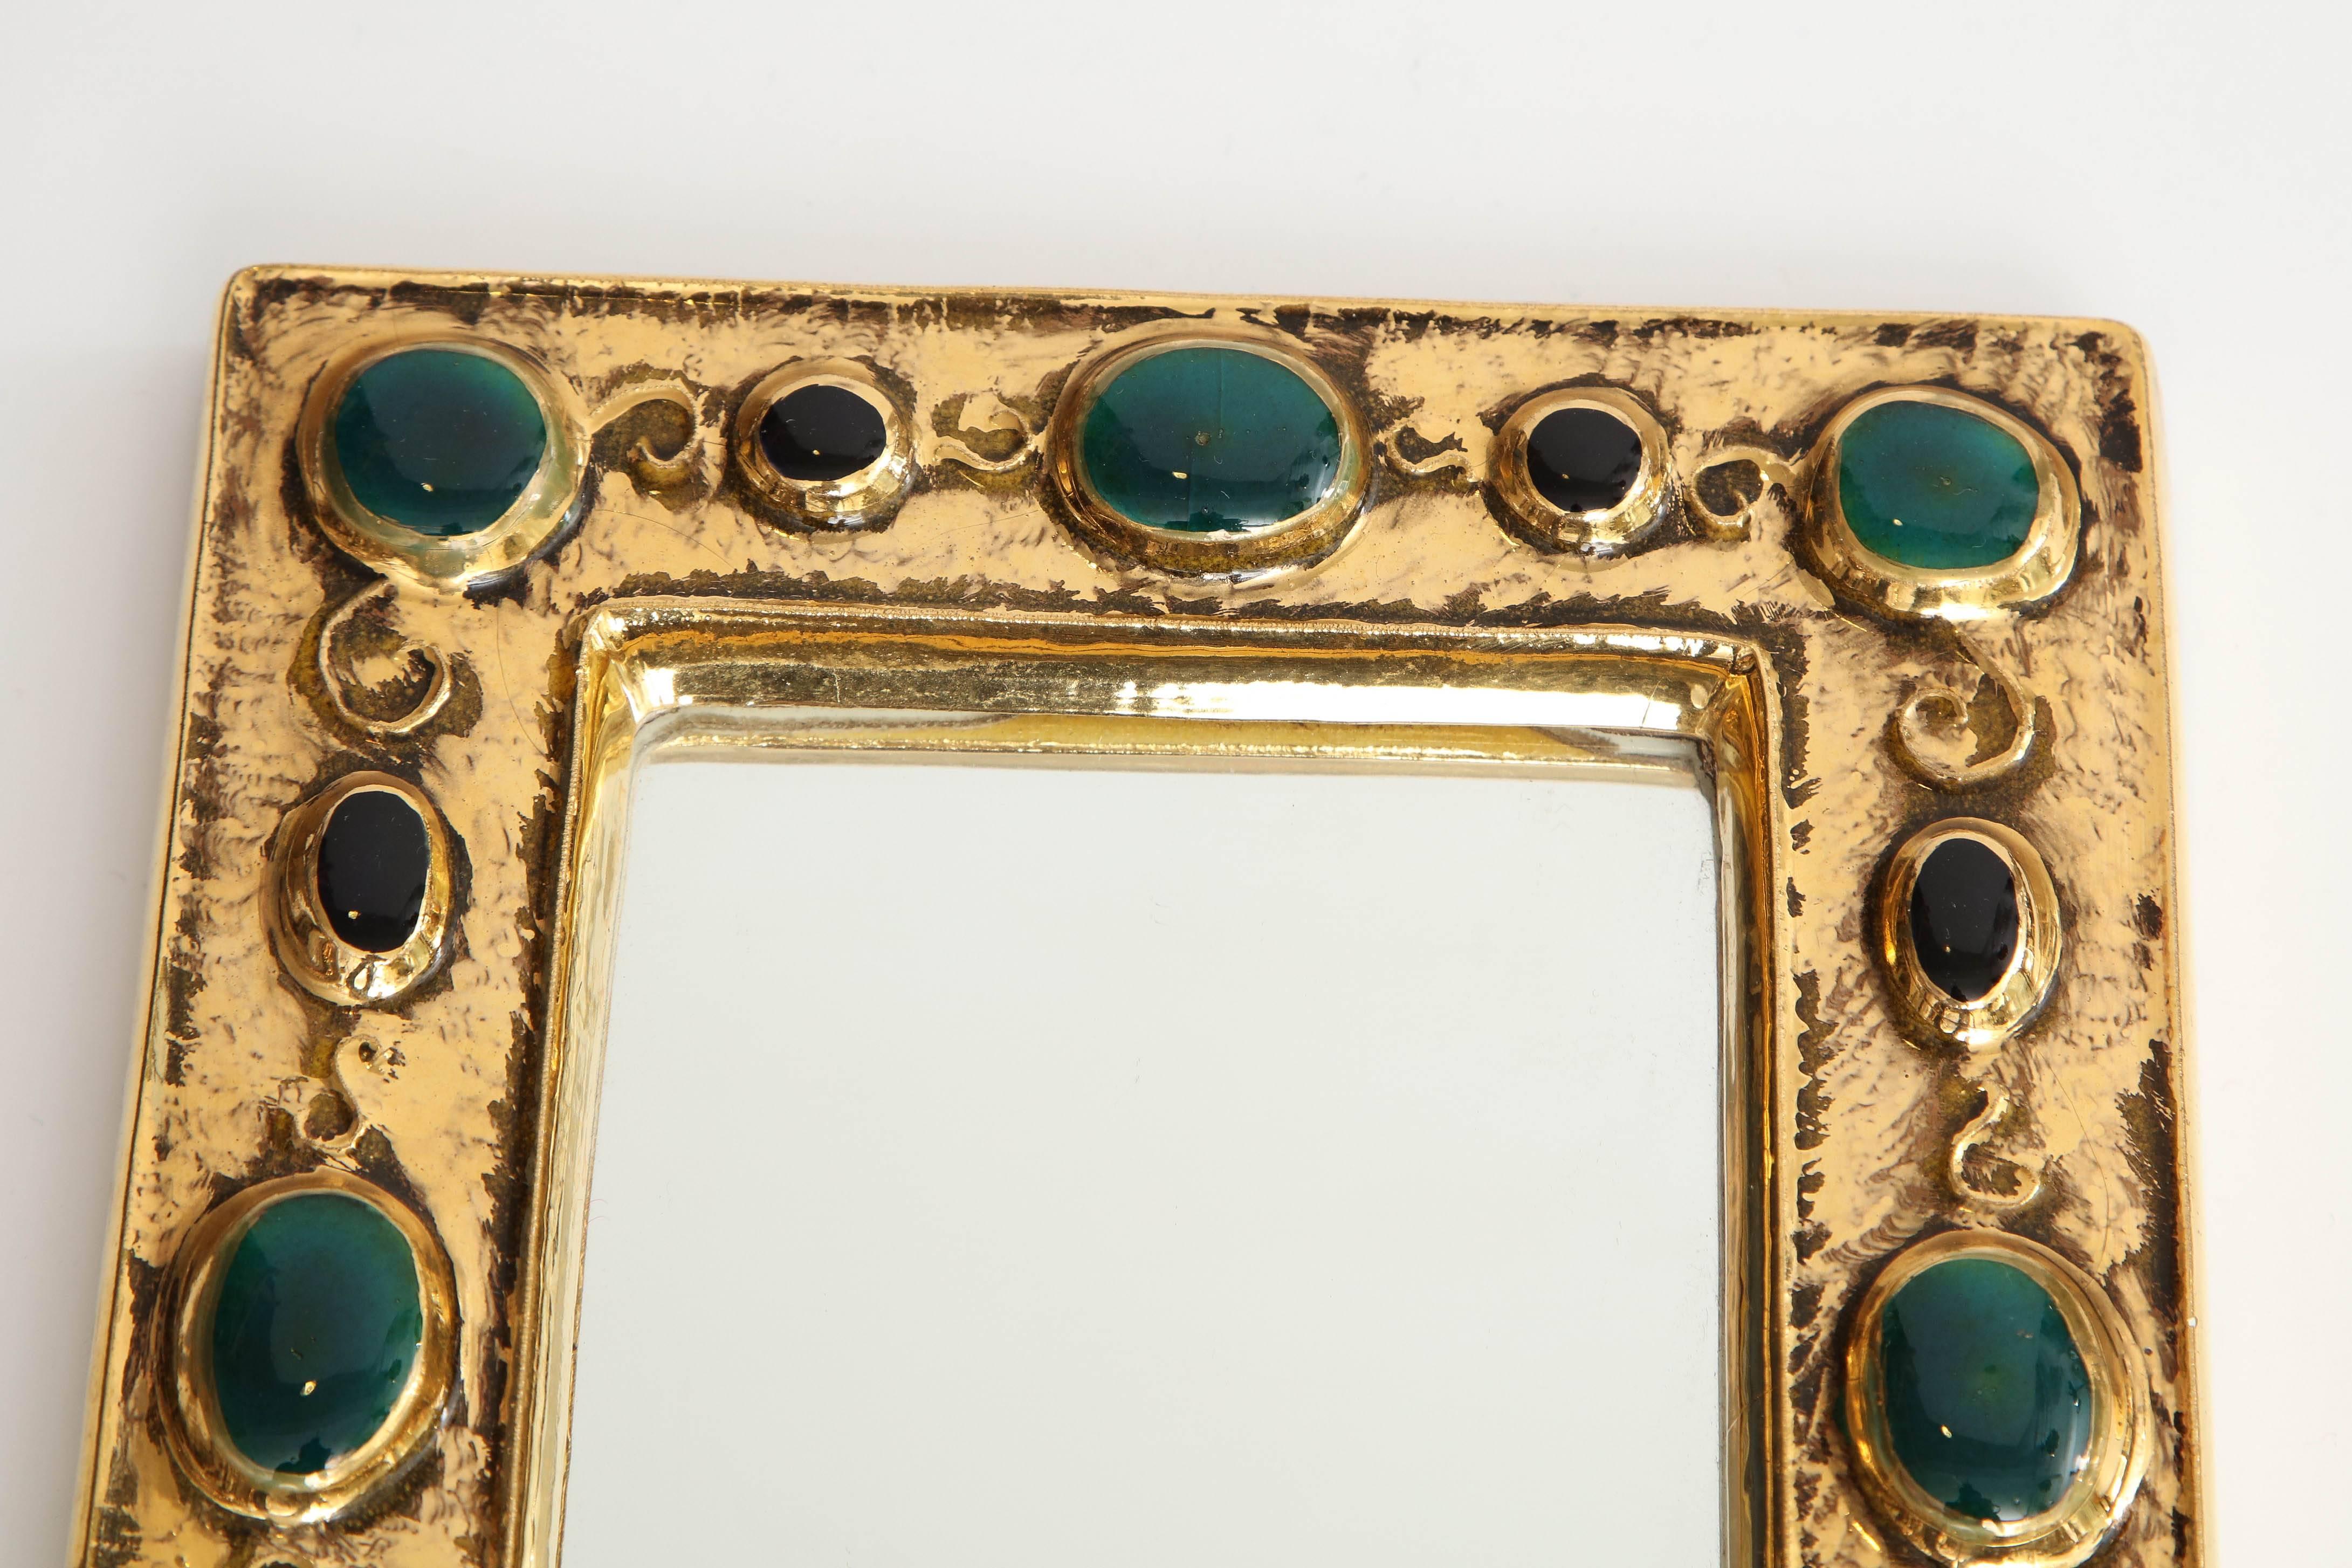 A beautiful and charming mirror designed by French artist Francois Lembo. Composed of a crackled gold glaze frame, the mirror features a design of 